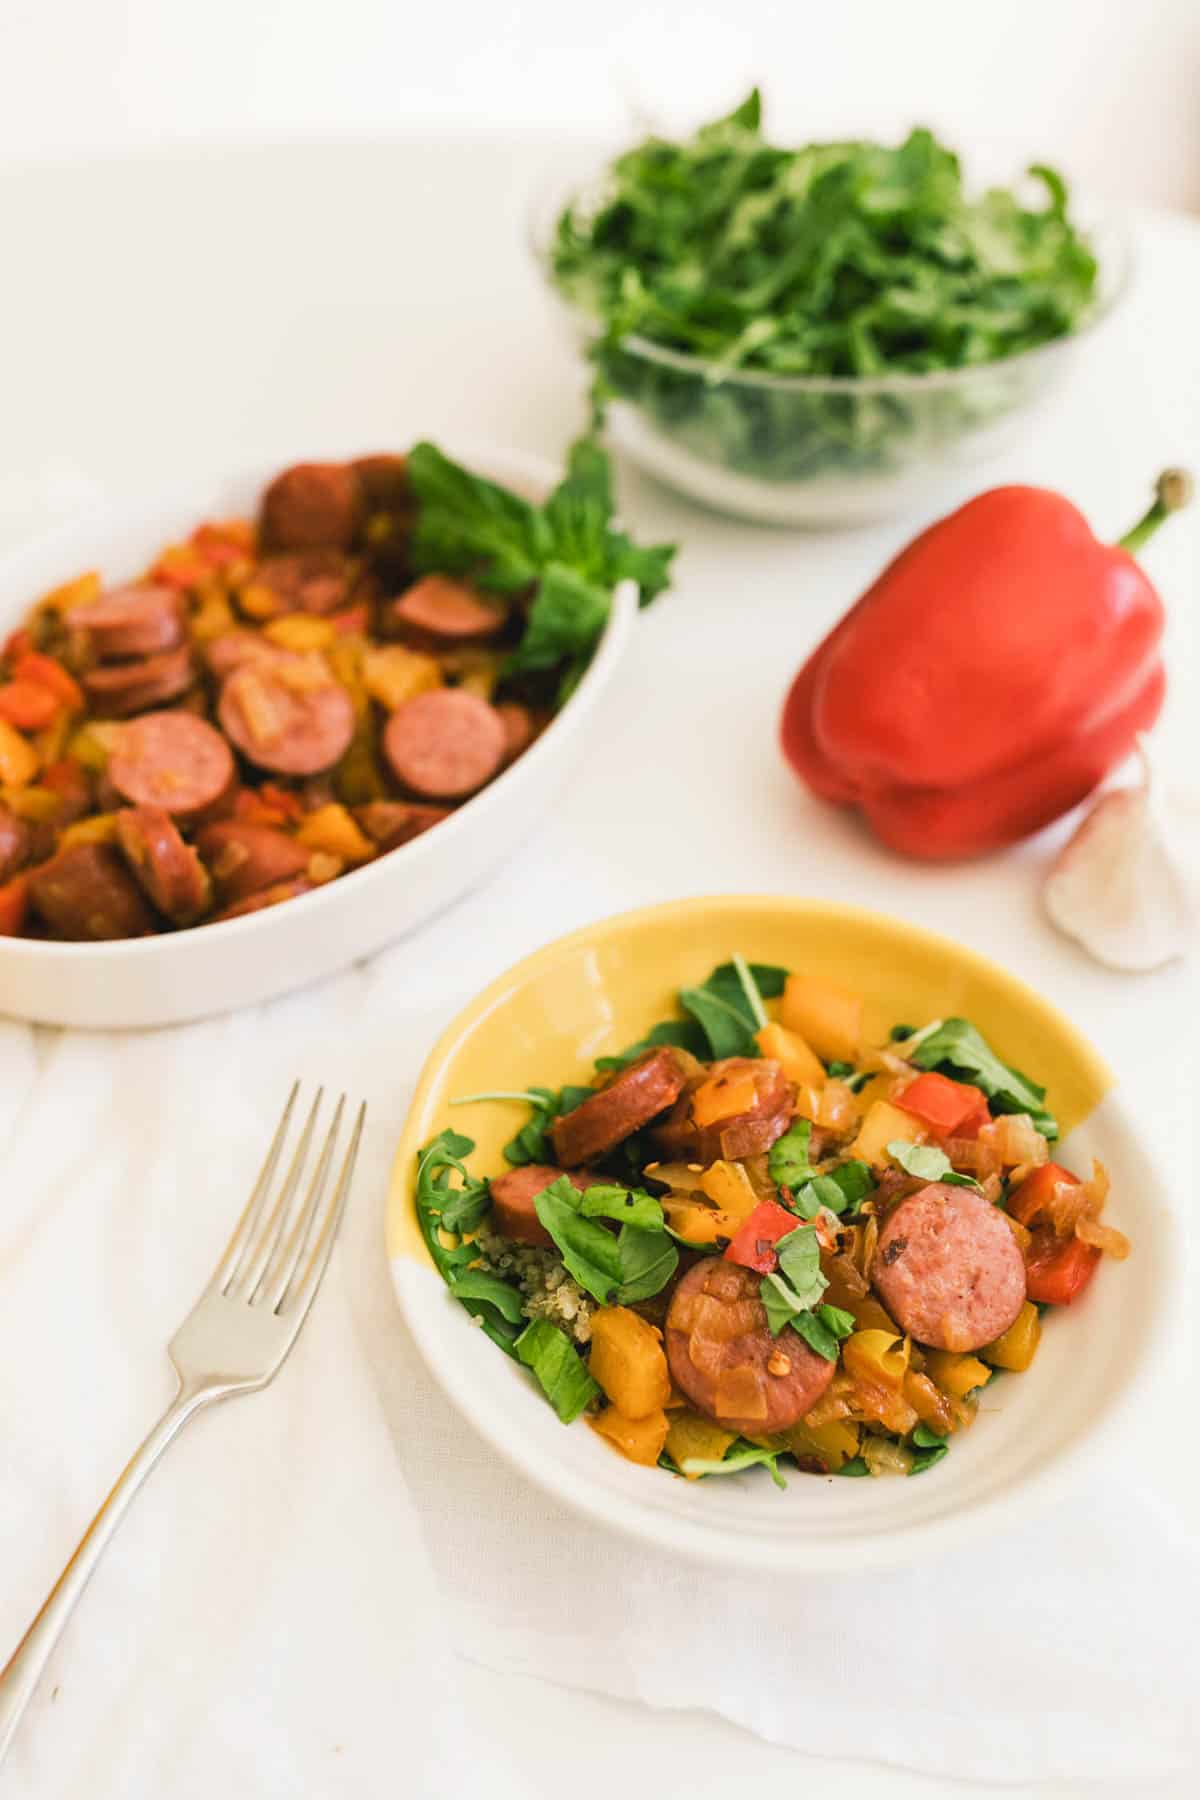 A serving dish and bowl of Quinoa and Sausage with peppers on a table next to a bowl of arugula and a red bell pepper.